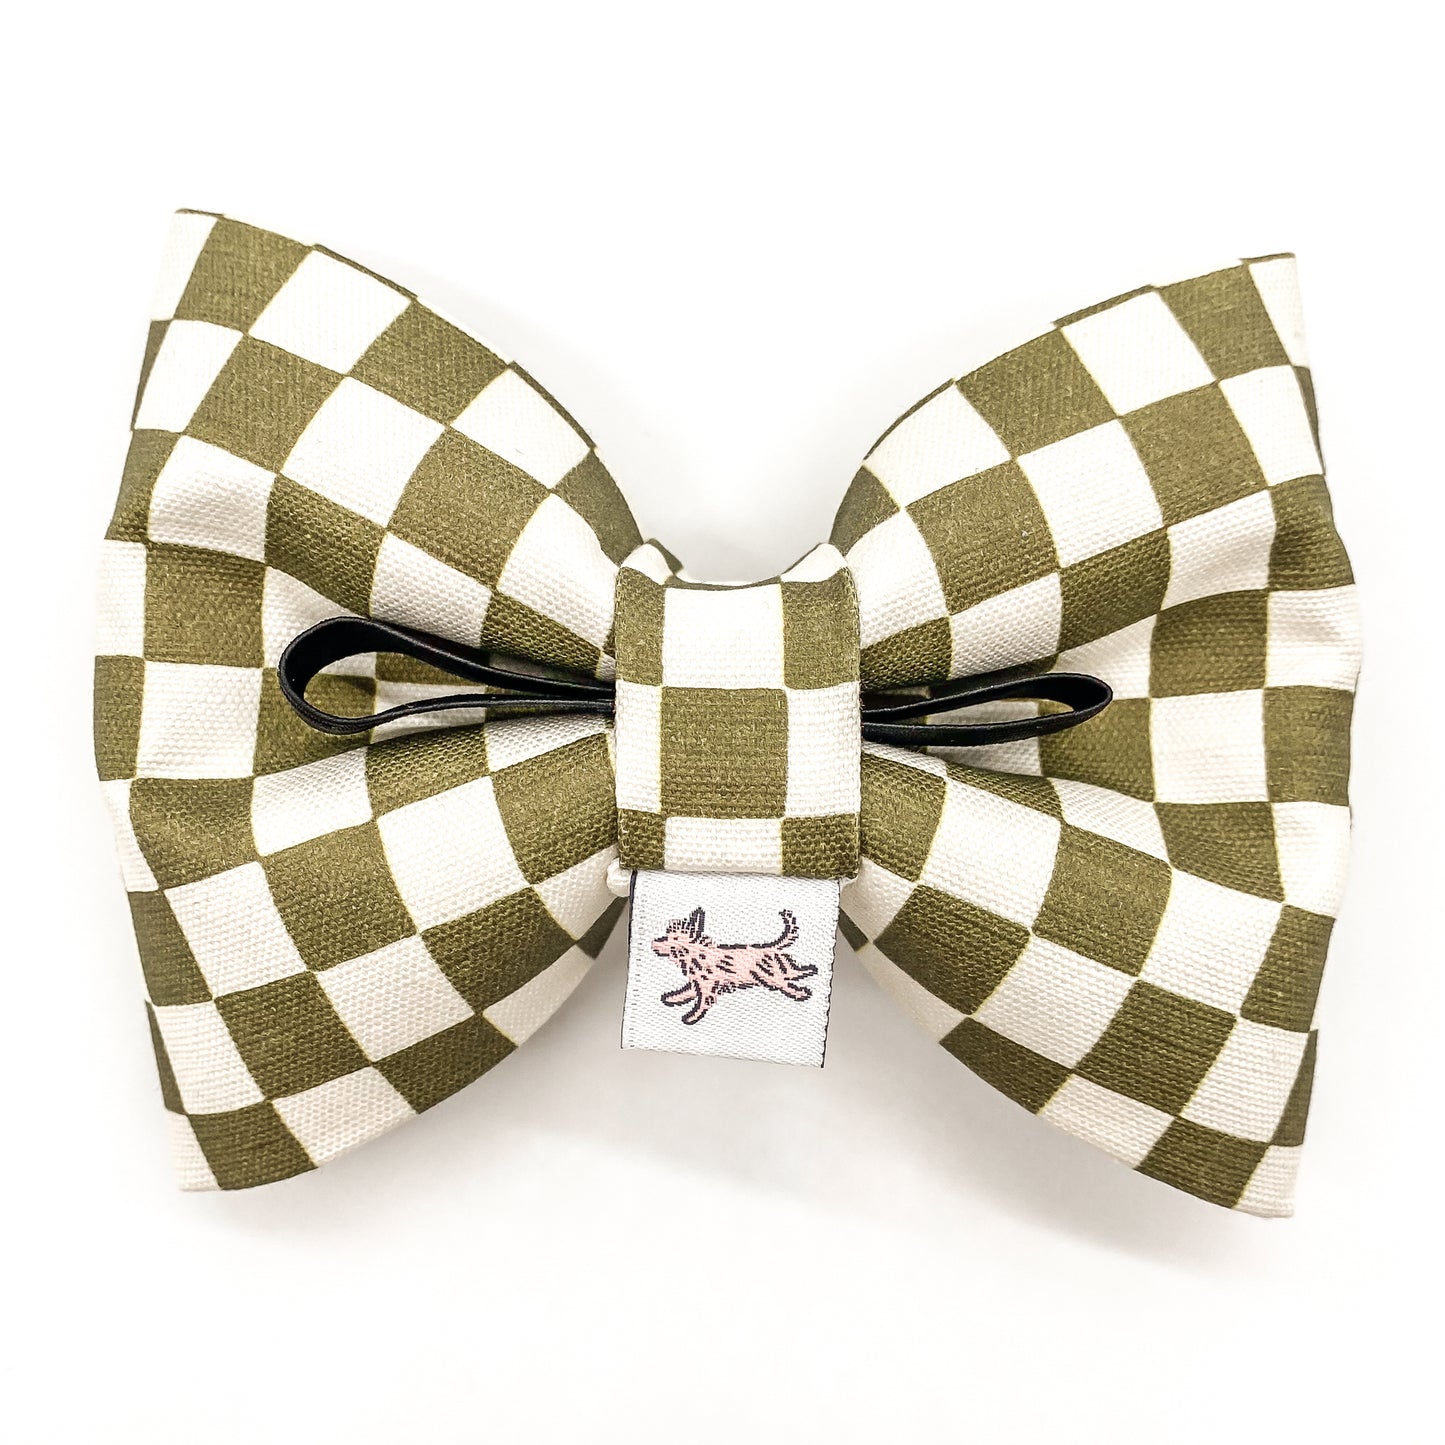 BIG giant dog cat bow tie olive green checkerboard puffy large sized dog accessory Bop Pop Pets